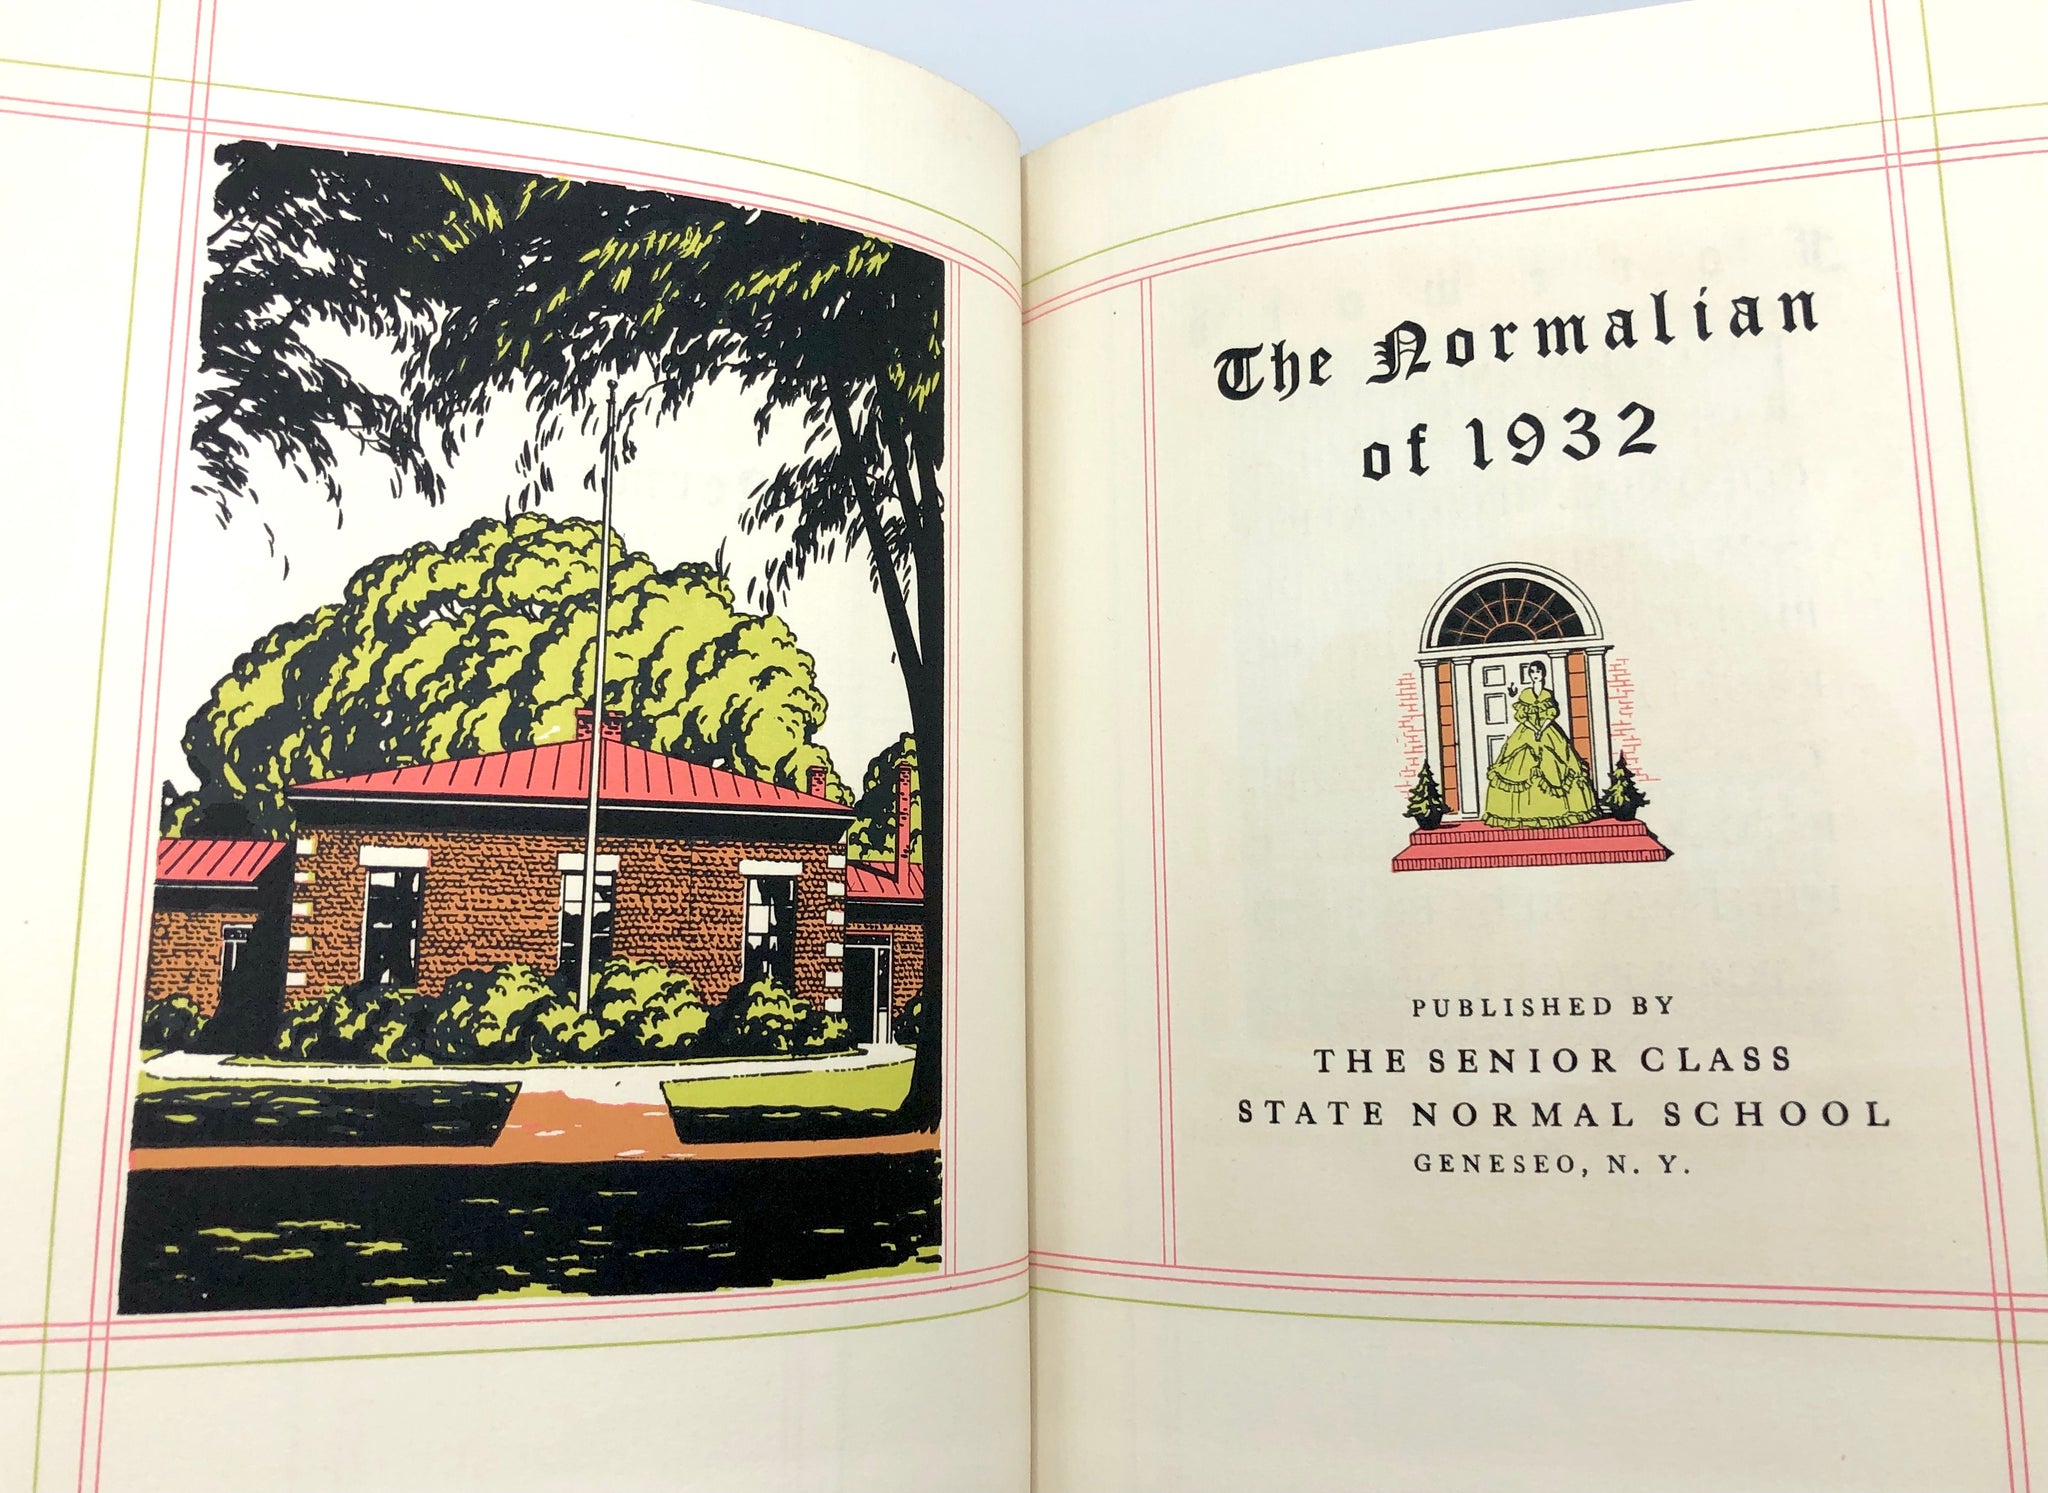 The Normalian of 1932 - Yearbook of the State Normal School at Geneseo, NY